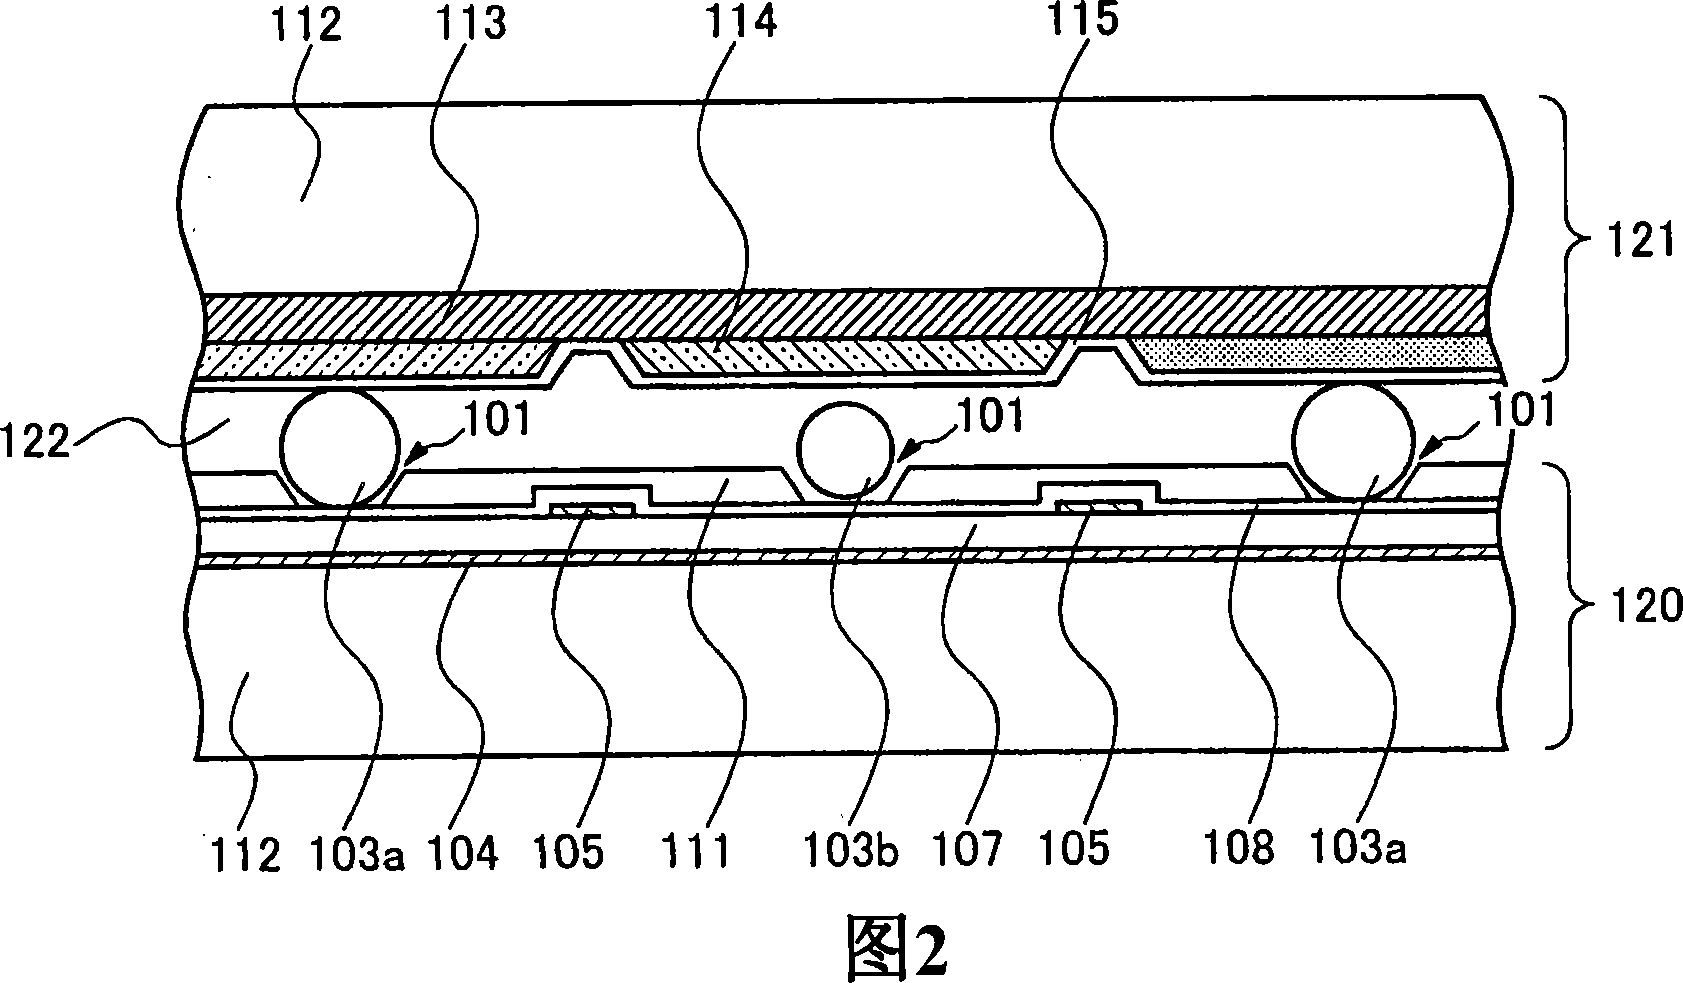 Liquid crystal display panel and method of manufacturing the same